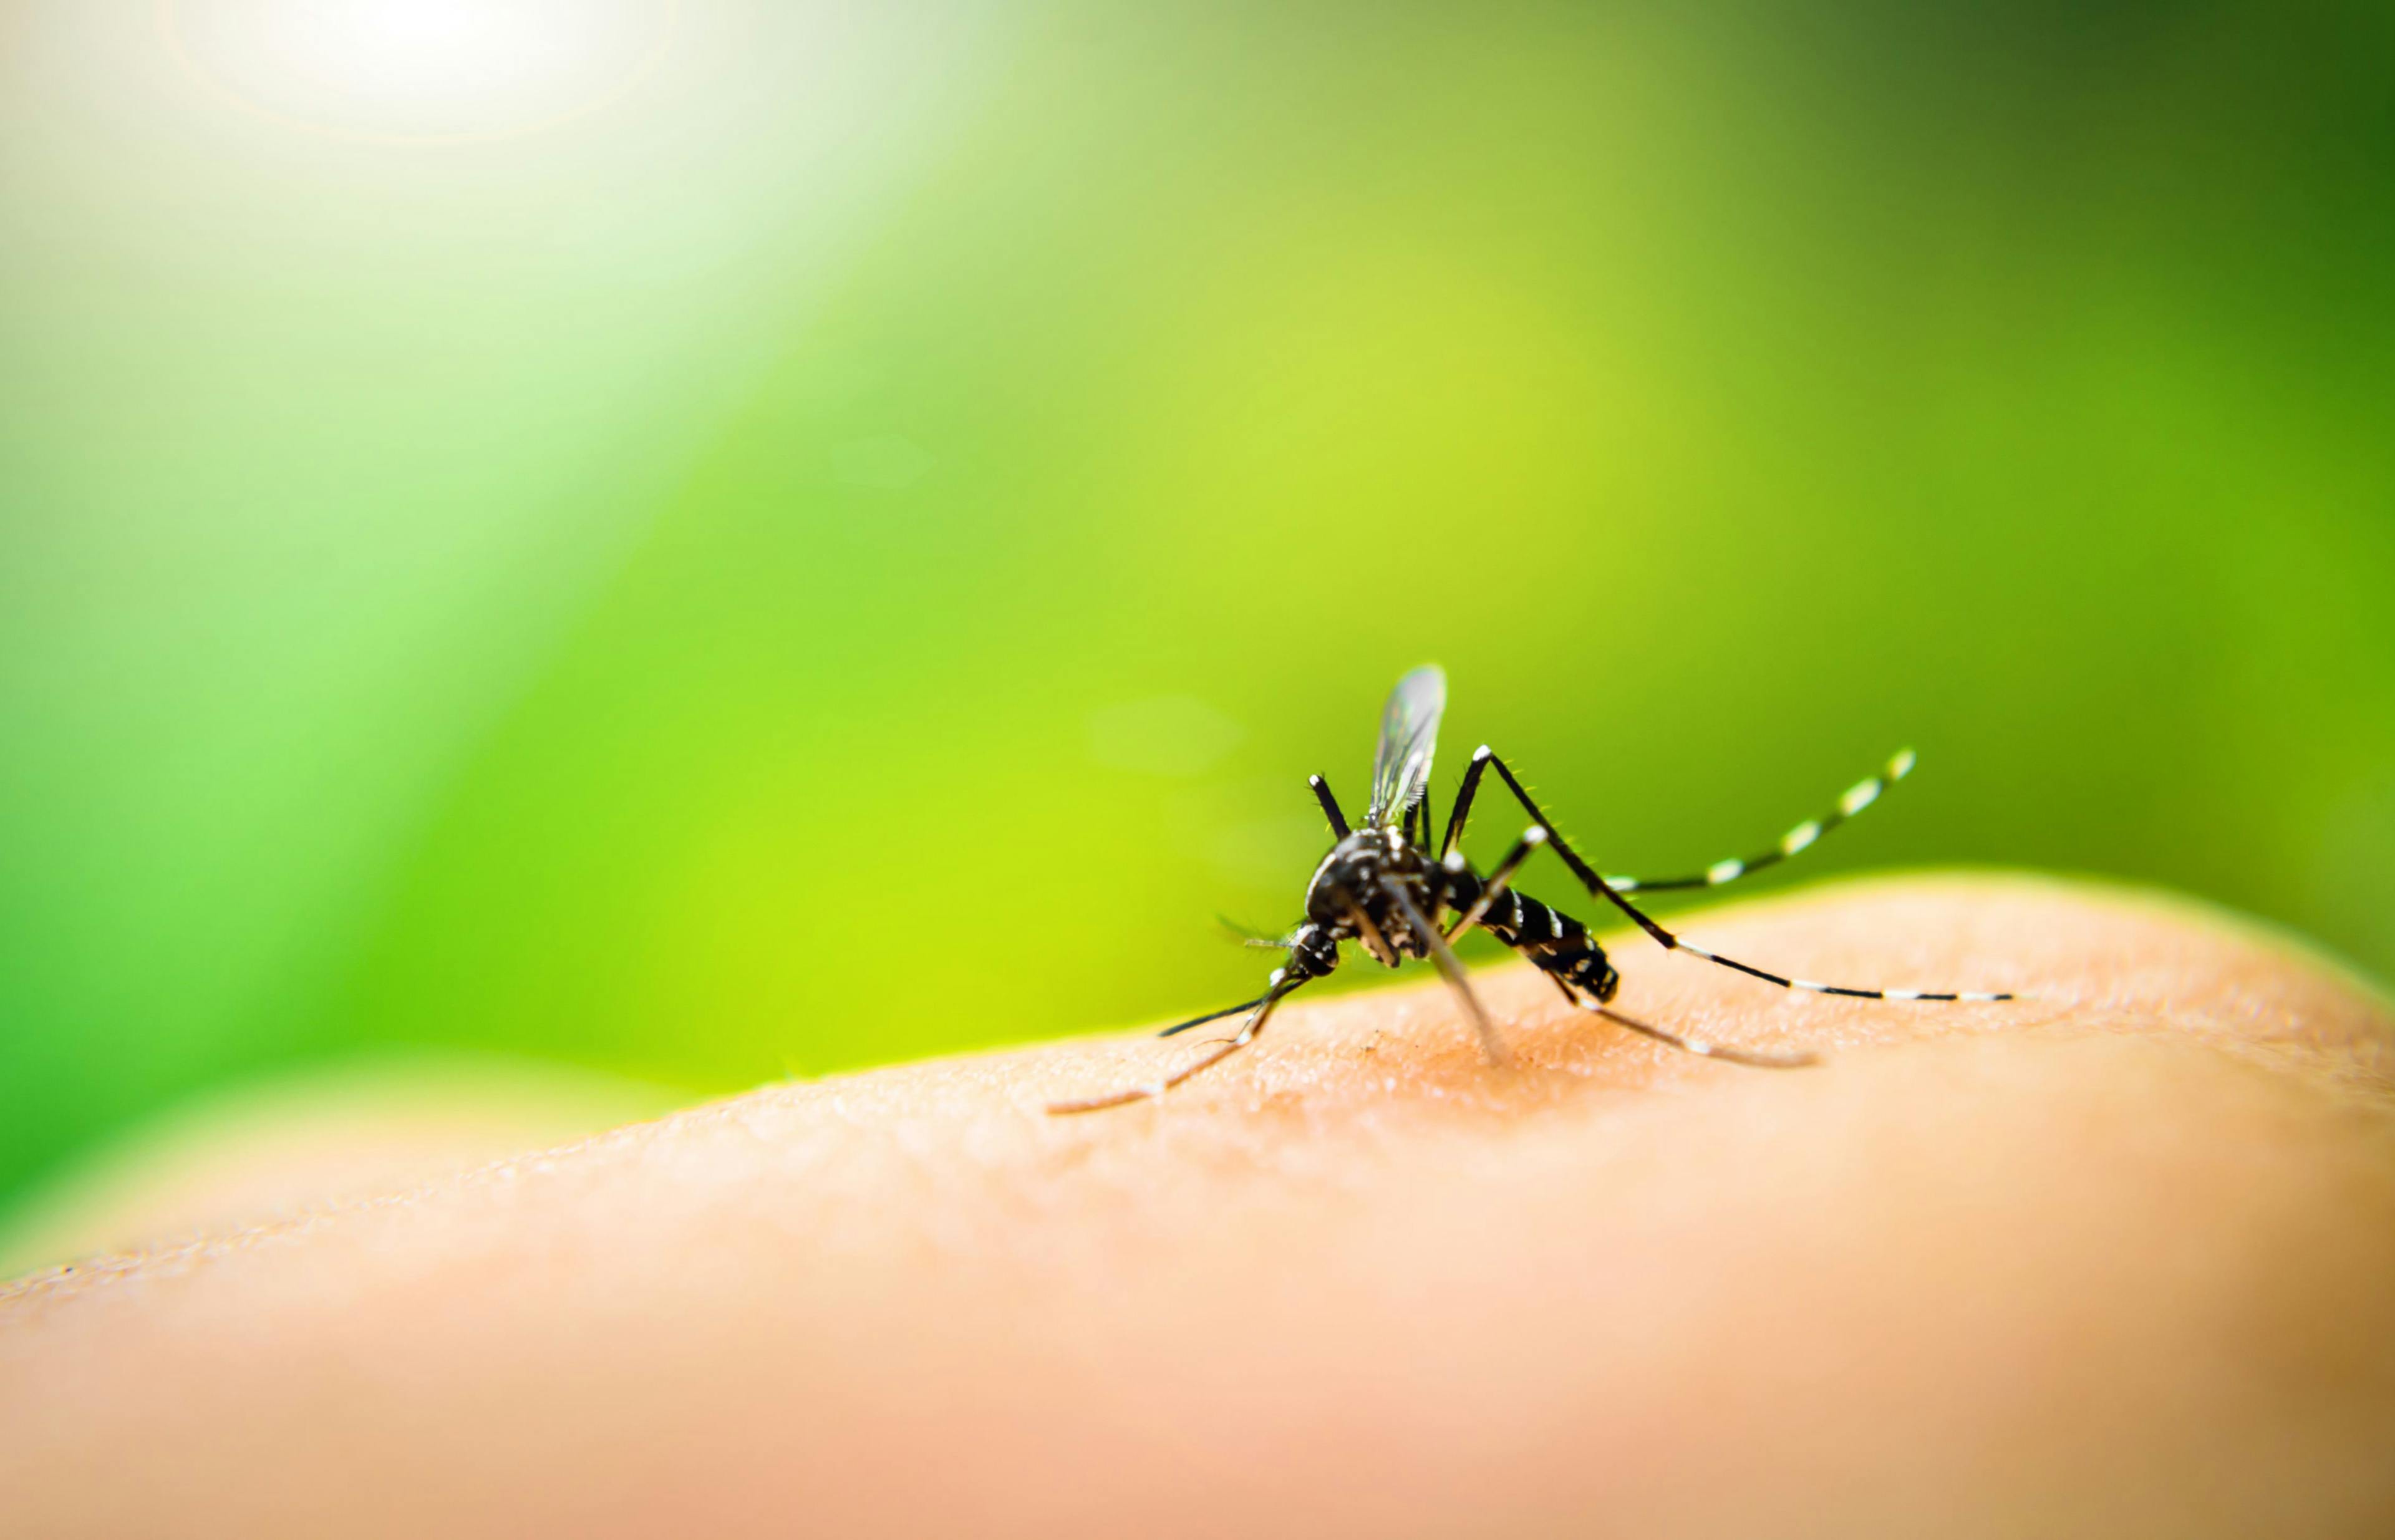 Chikungunya Vaccine for Adolescents Shows Positive Topline Results in Phase 3 Trial